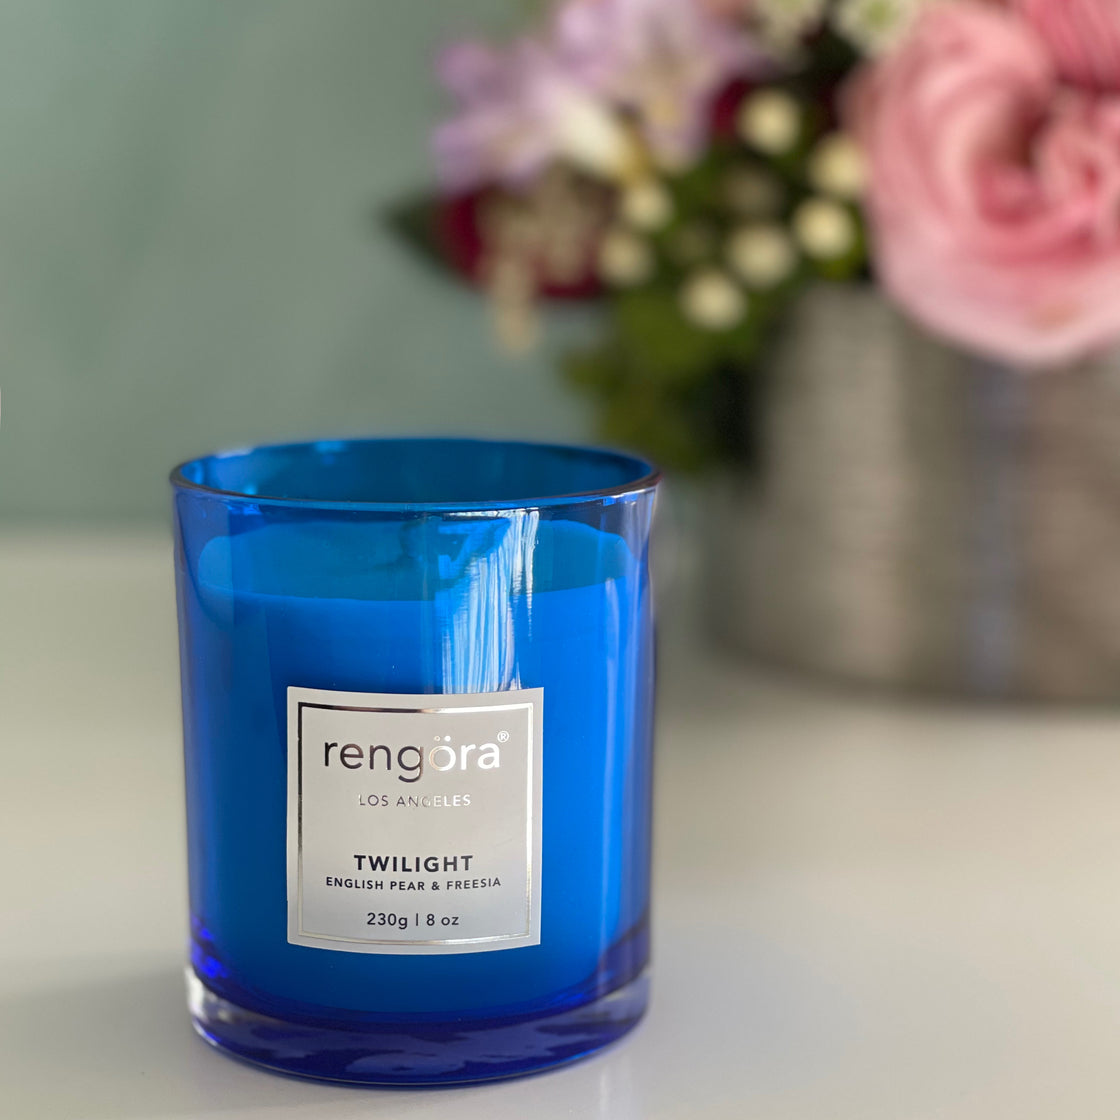 rengöra's Twilight scented candle for the home - English pear and freesia in a beautiful cobalt blue colored glass